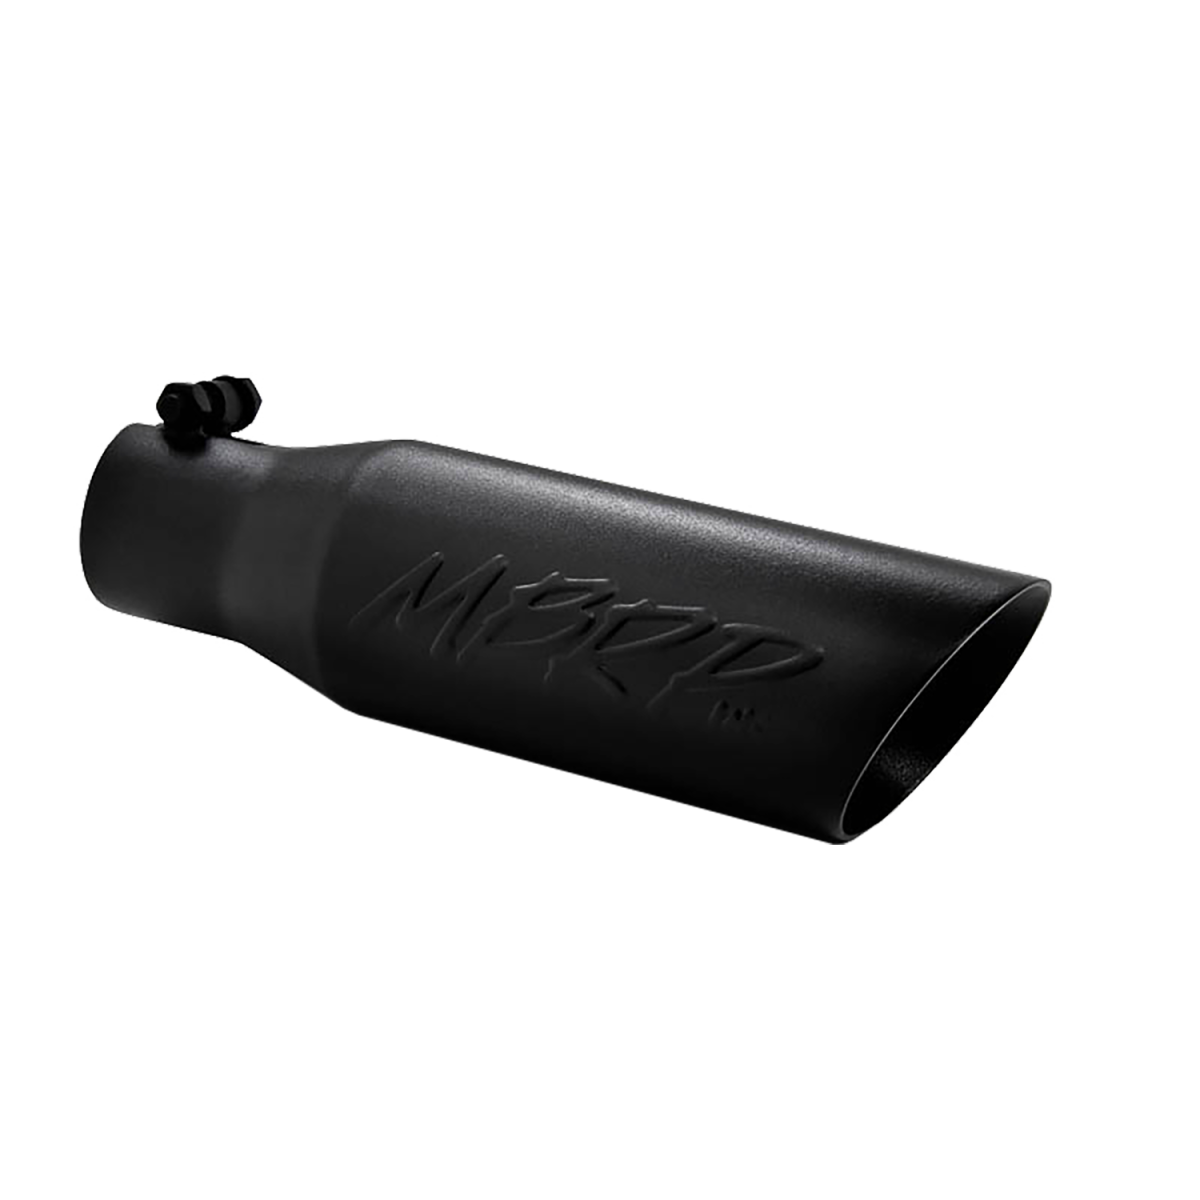 MBRP - MBRP Exhaust Tip 3 1/2 Inch O.D. Dual Wall Angled 2 1/2 Inch Inlet 12 Inch Length Black Finish T5106BLK